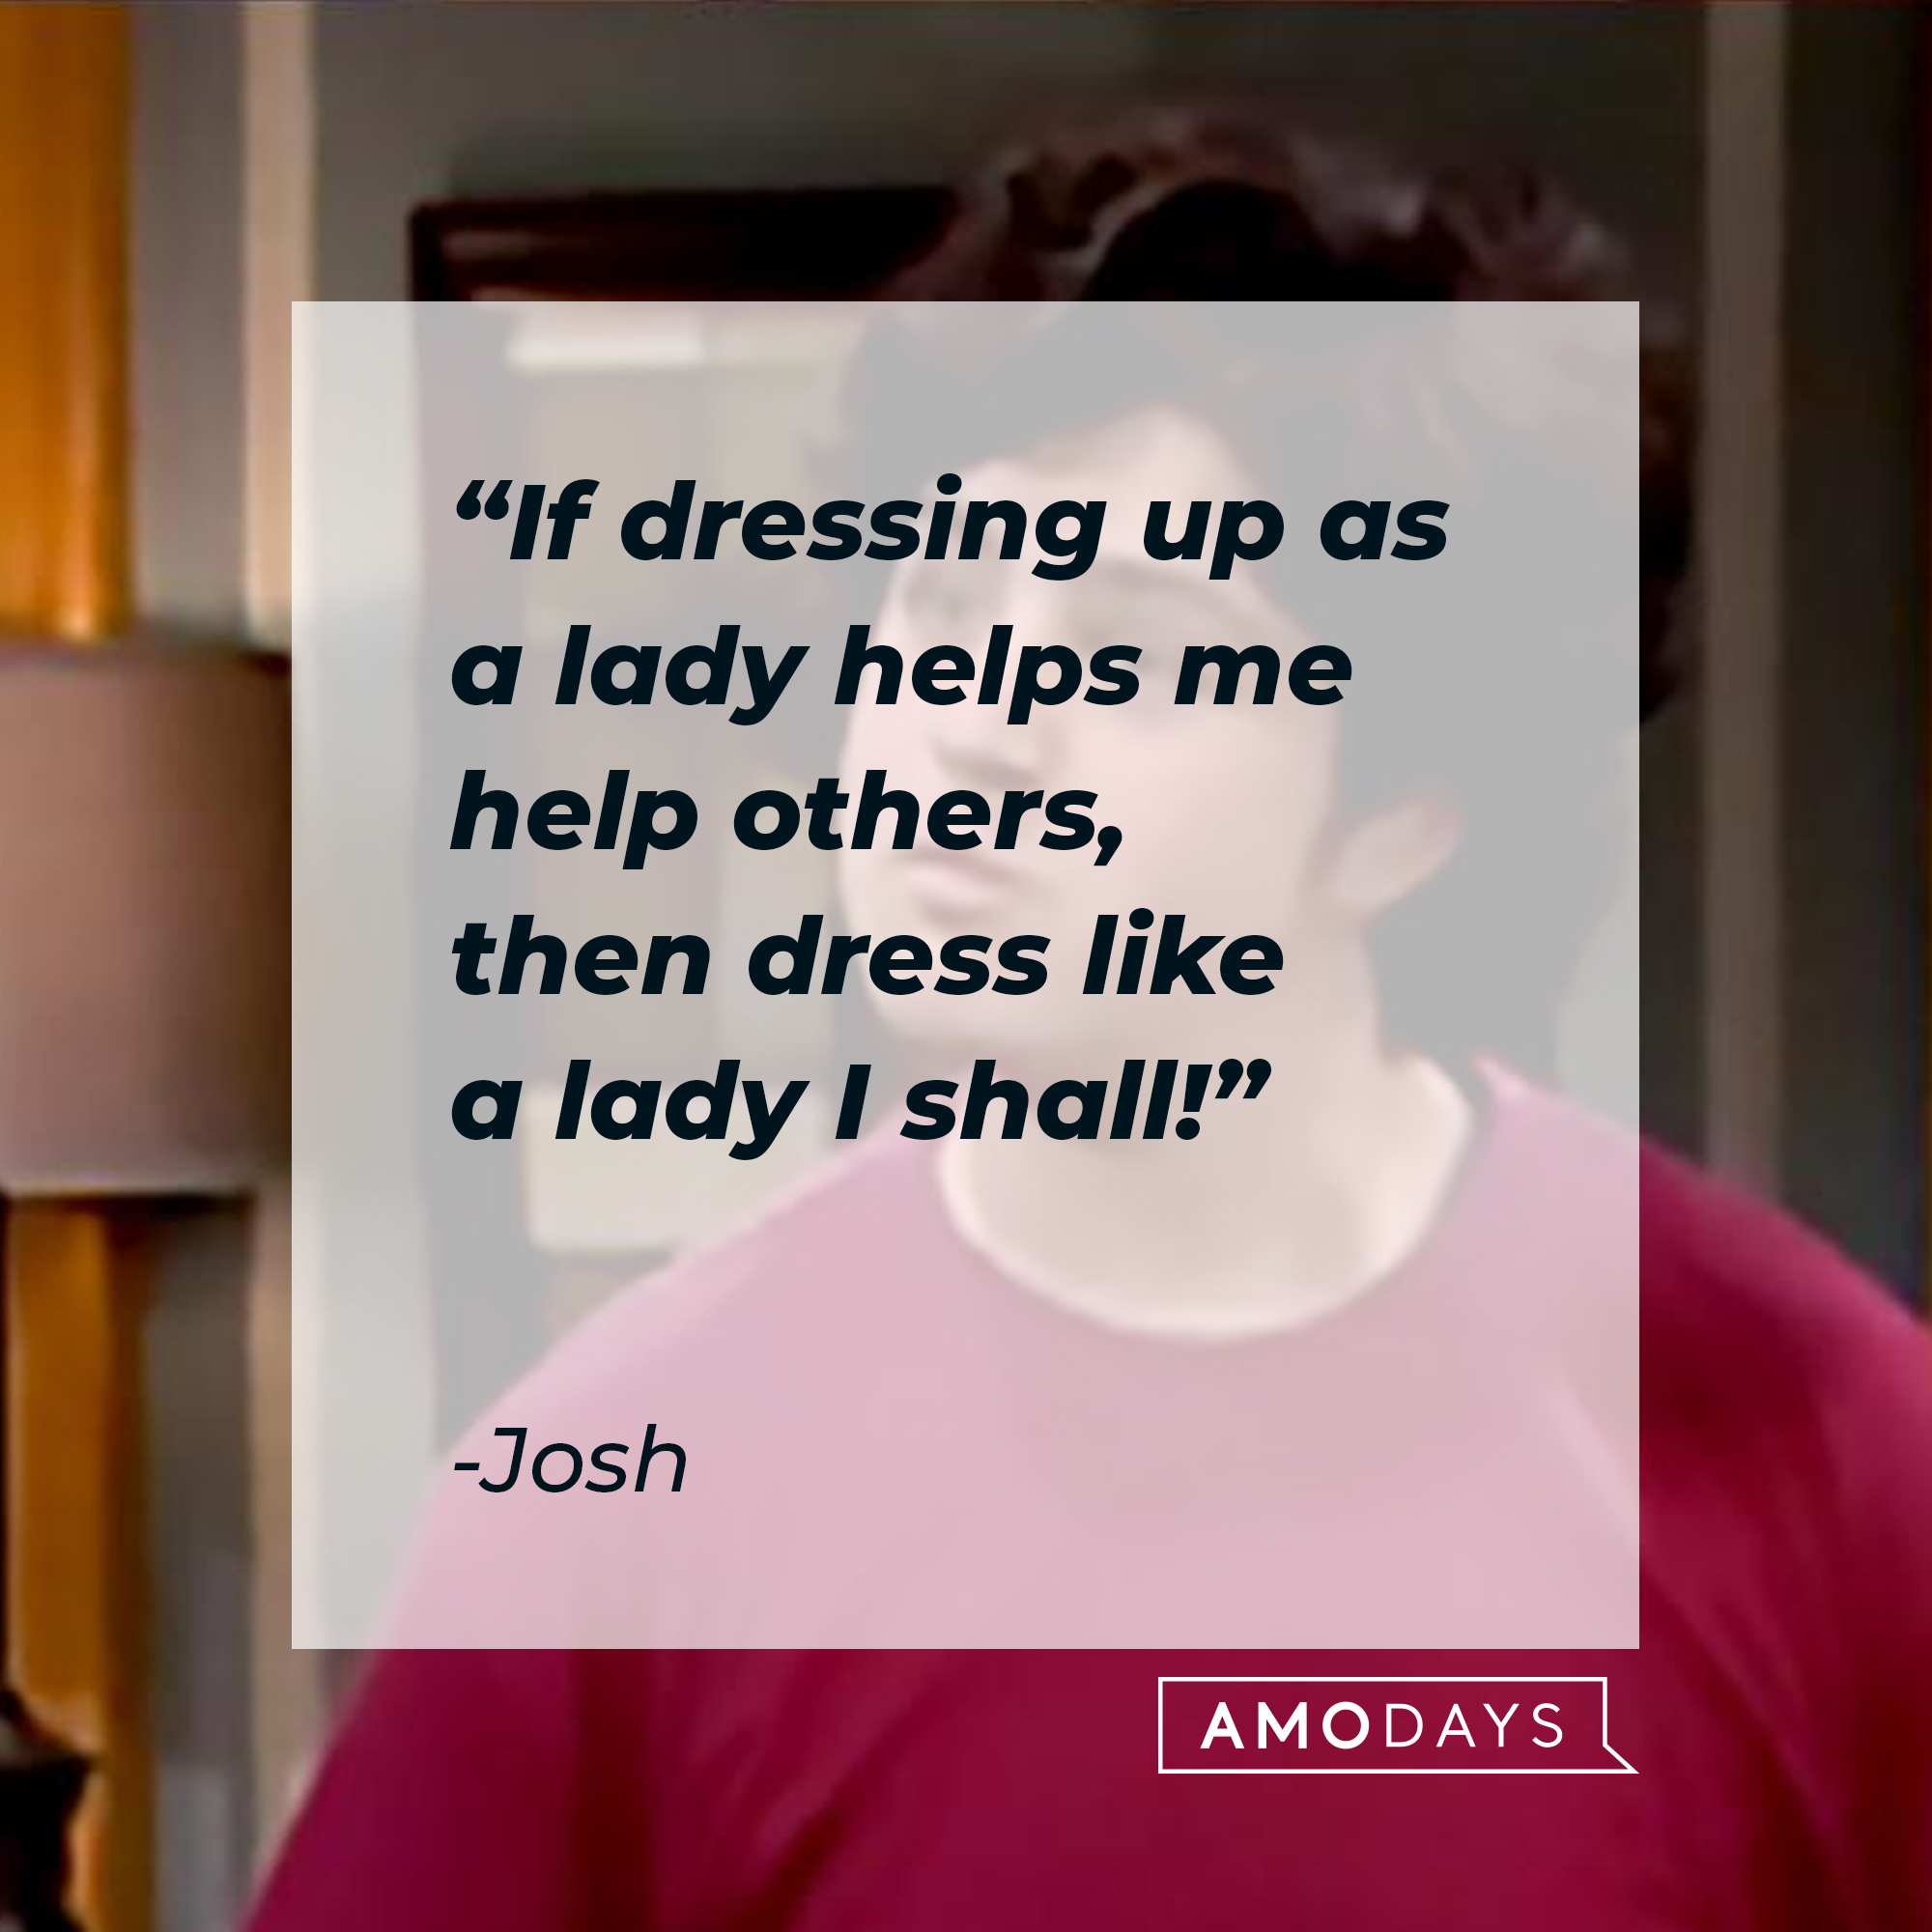 Josh's quote, "If dressing up as a lady helps me help others, then dress like a lady I shall!" | Source: facebook.com/Drake & Josh